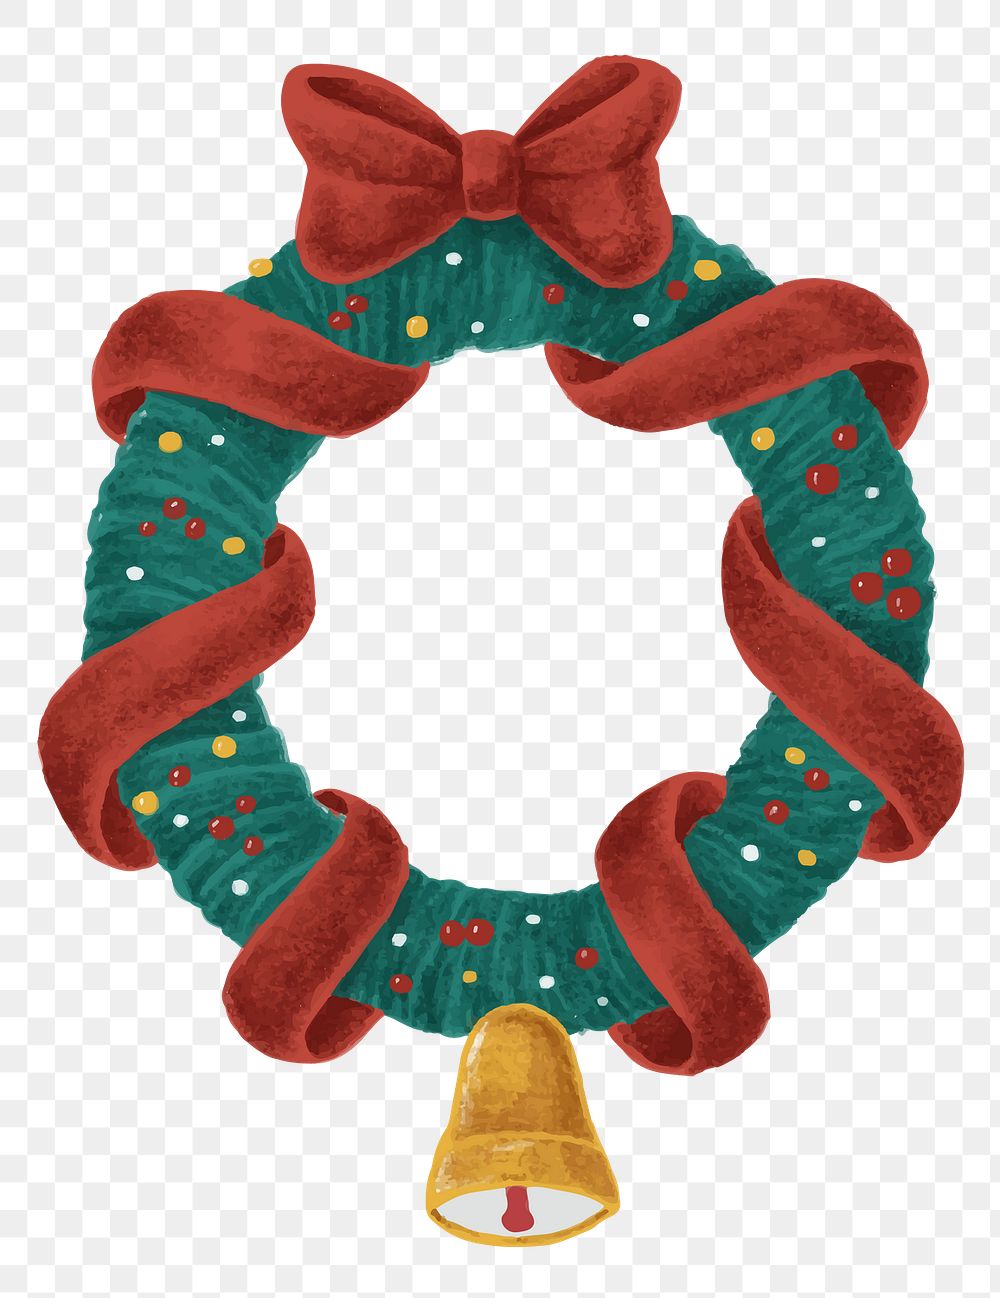 Christmas wreath png sticker hand drawn